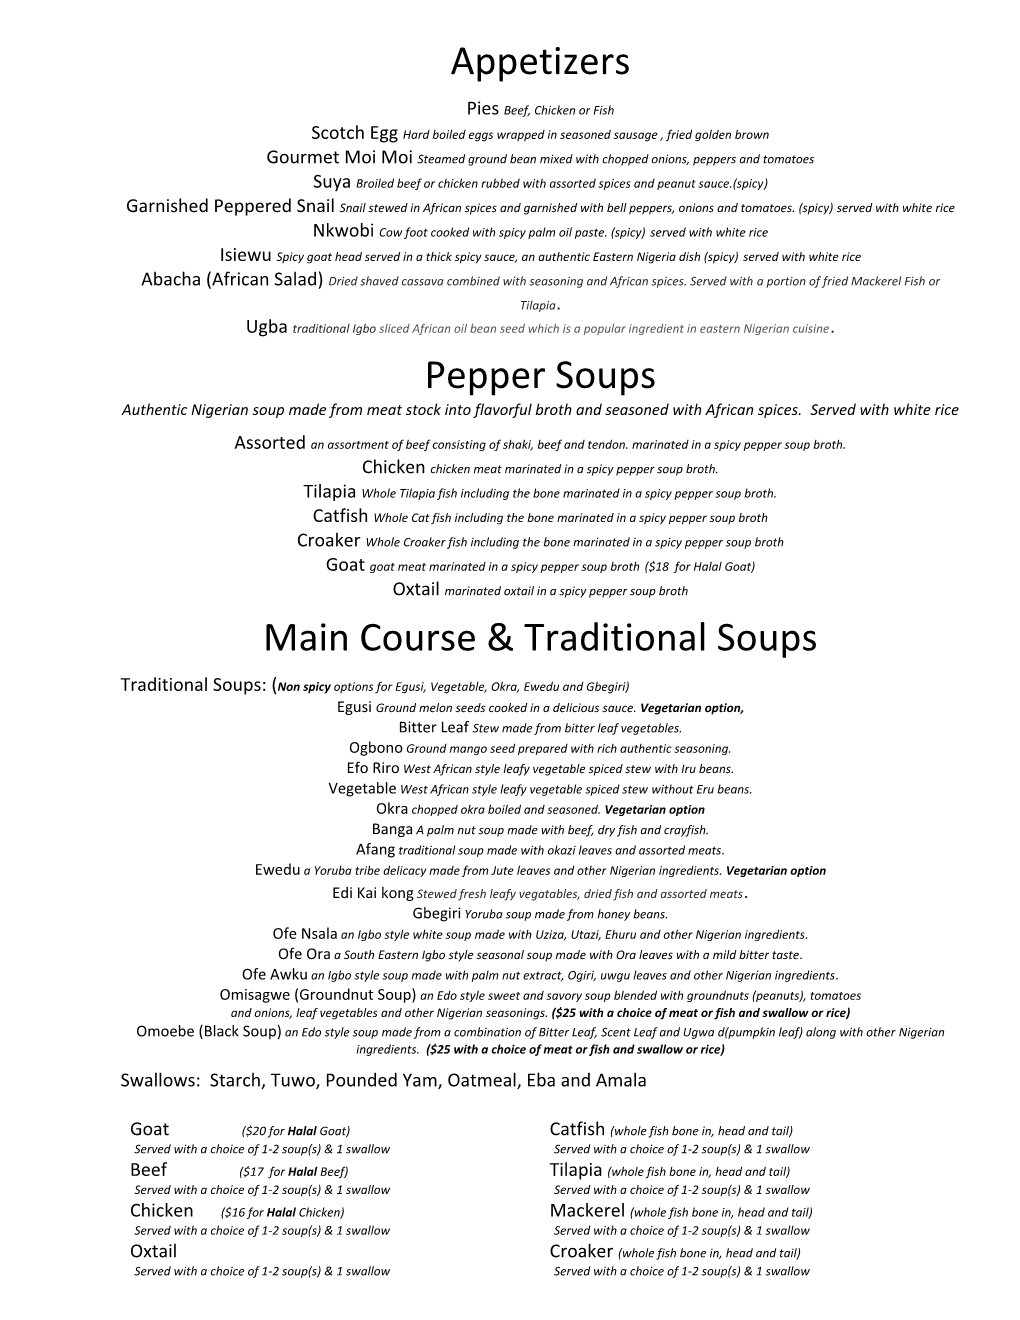 Appetizers Pepper Soups Main Course & Traditional Soups